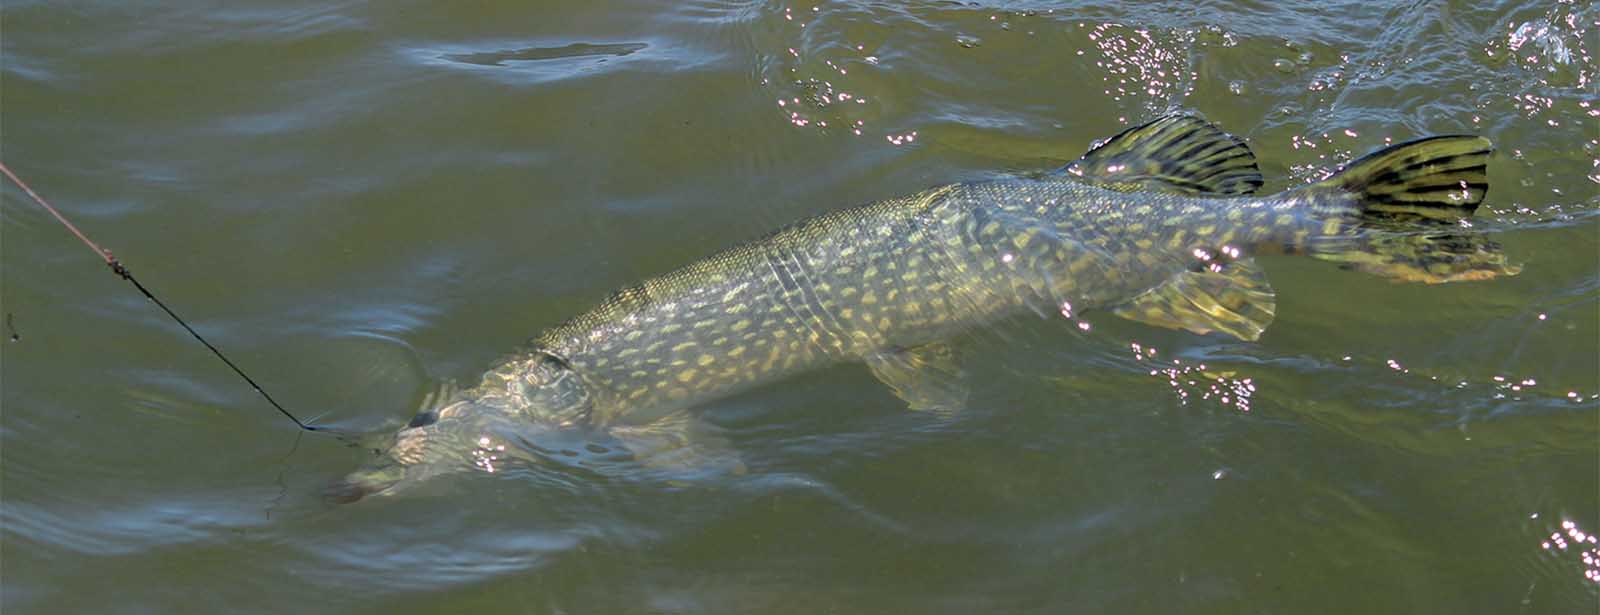 Pike in Water